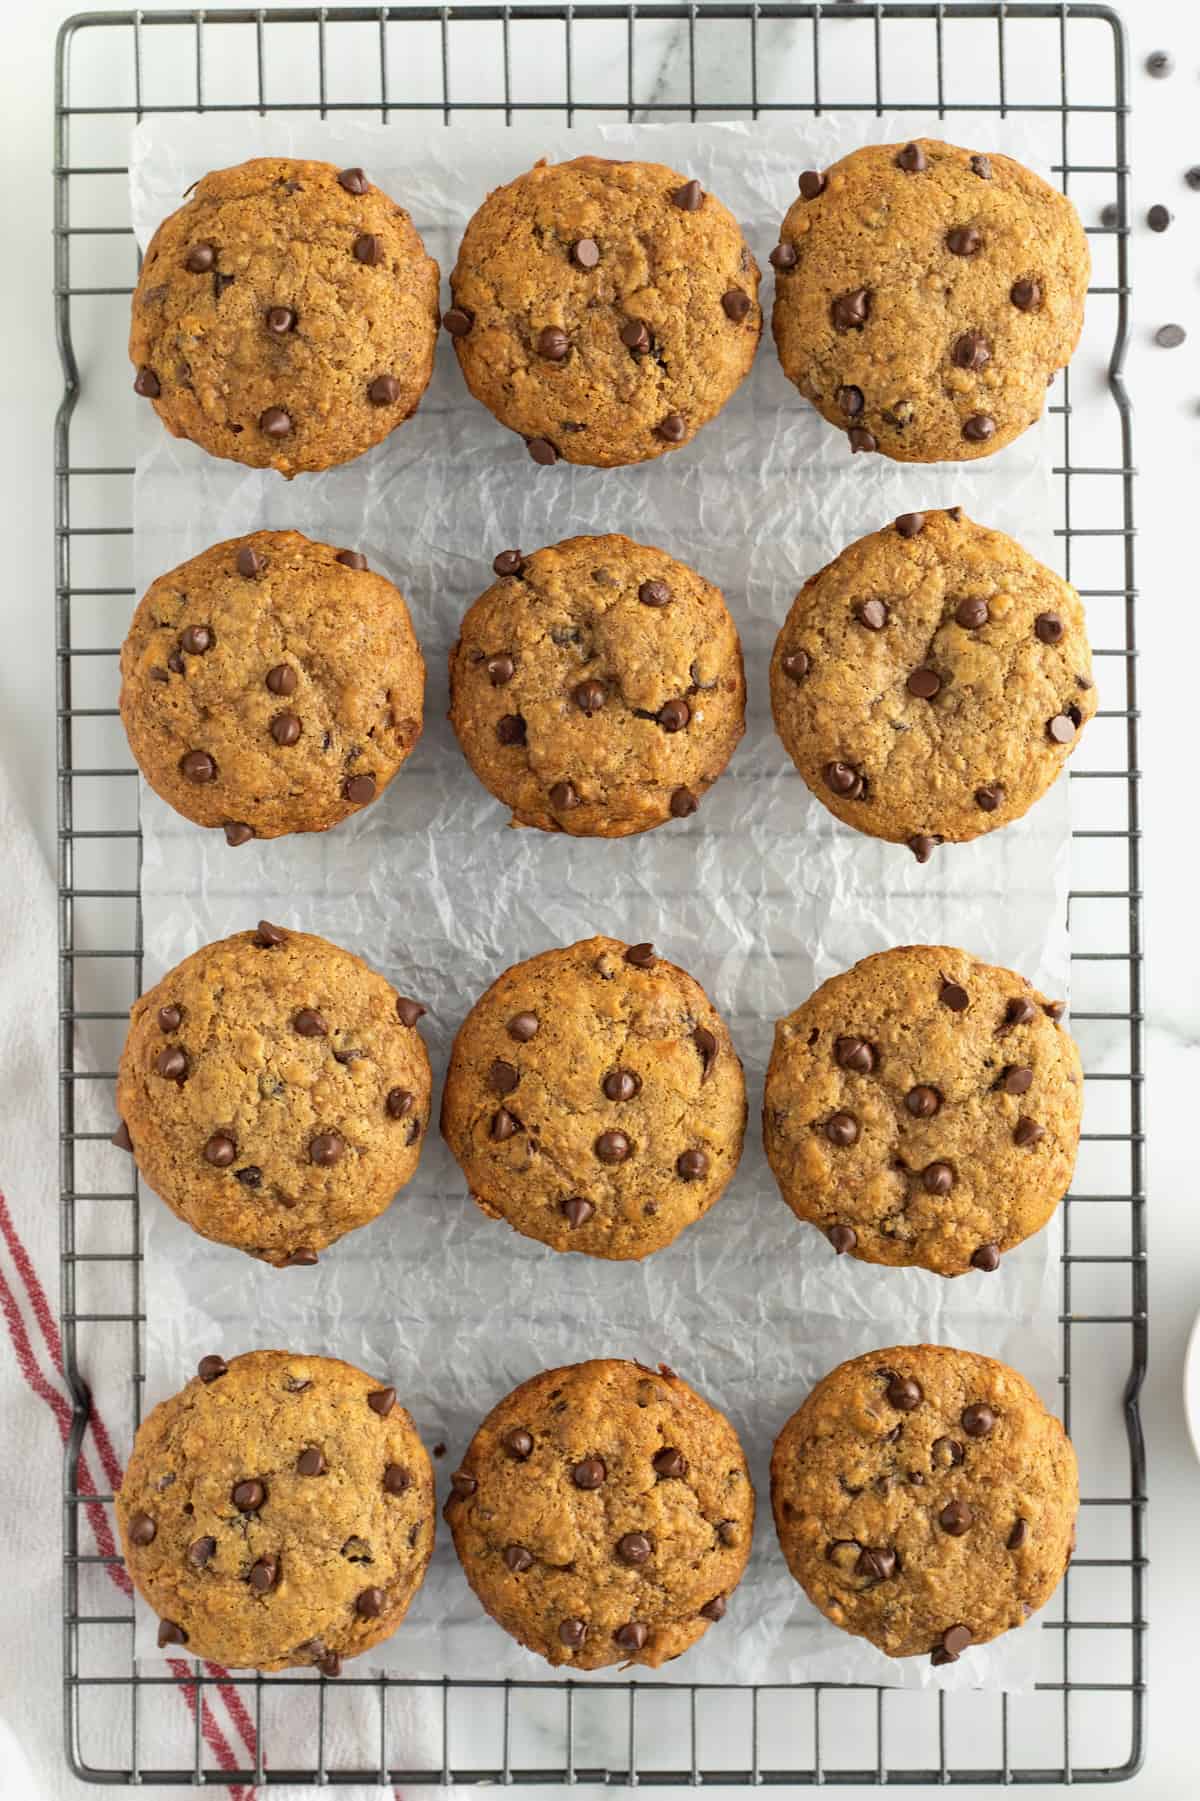 Whole Wheat Peanut Butter Banana Chocolate Chip Muffins by The BakerMama